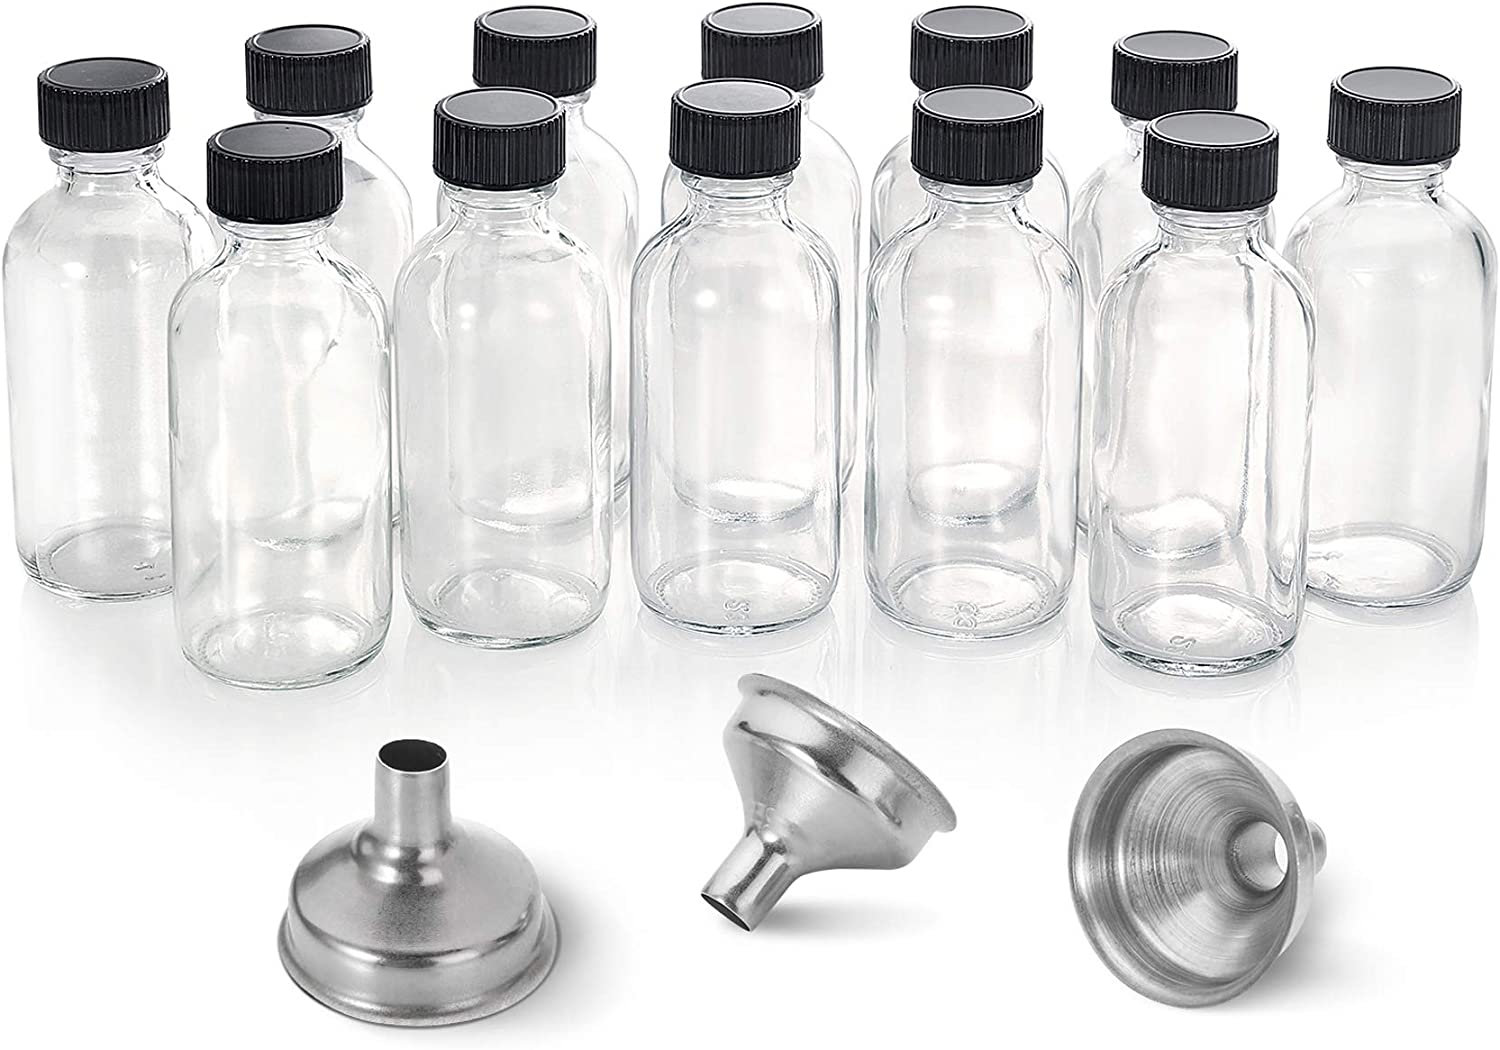 12 Pack, 2 oz Small Clear Glass Bottles with Lids & 3 Stainless Steel Funnels - 60ml
